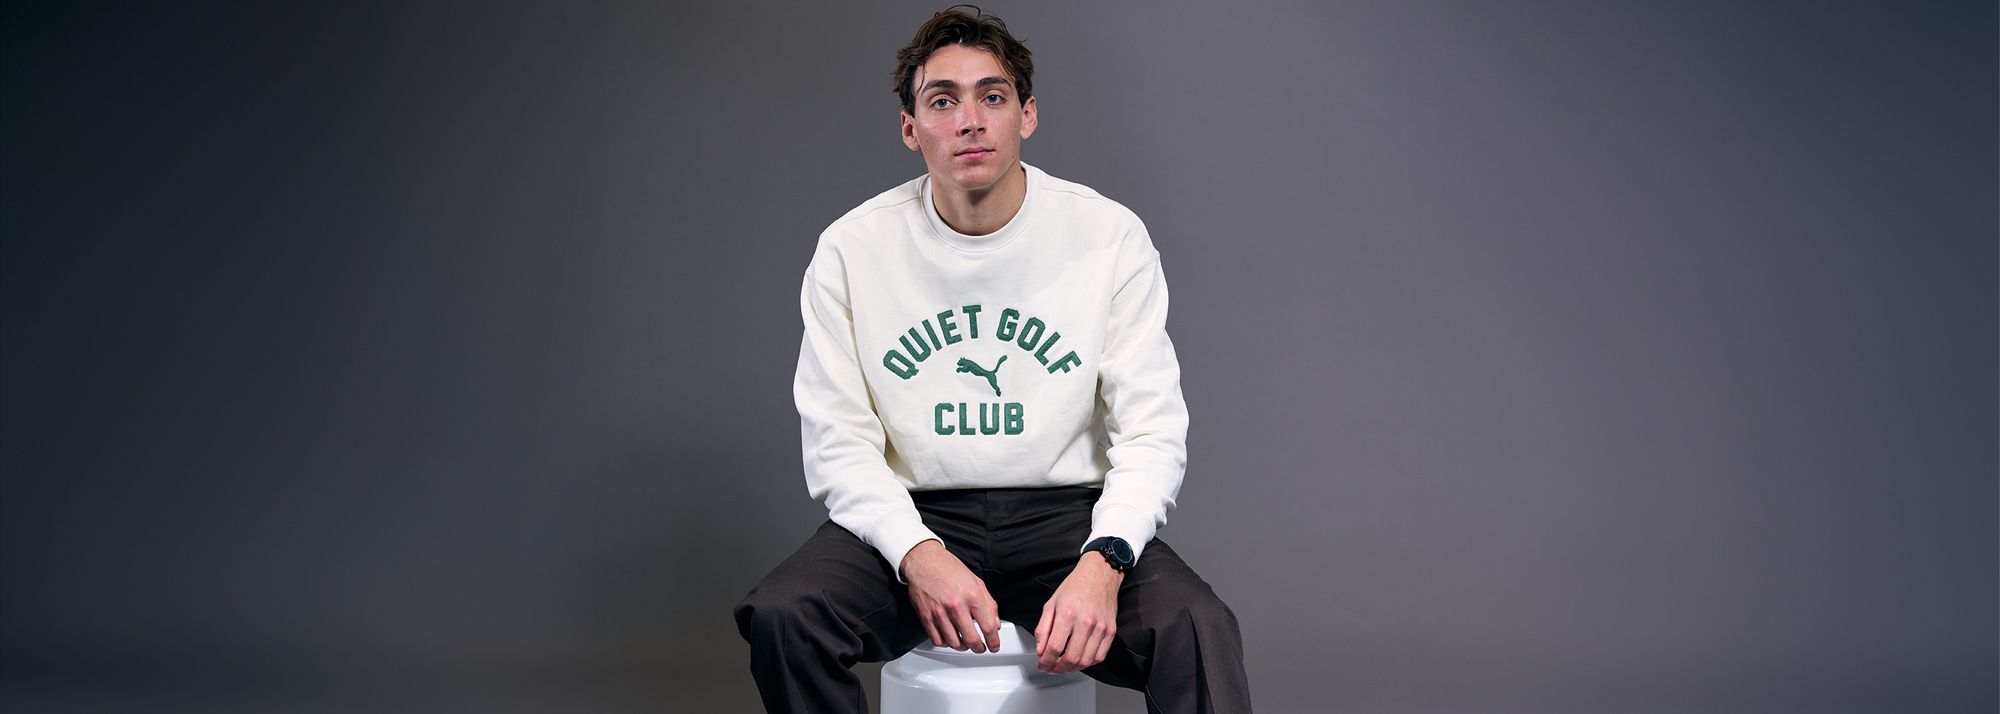 At the end of a year in which he retained his world pole vault title and twice improved his world record, Mondo Duplantis stood once more with an athlete of the year award in his hand